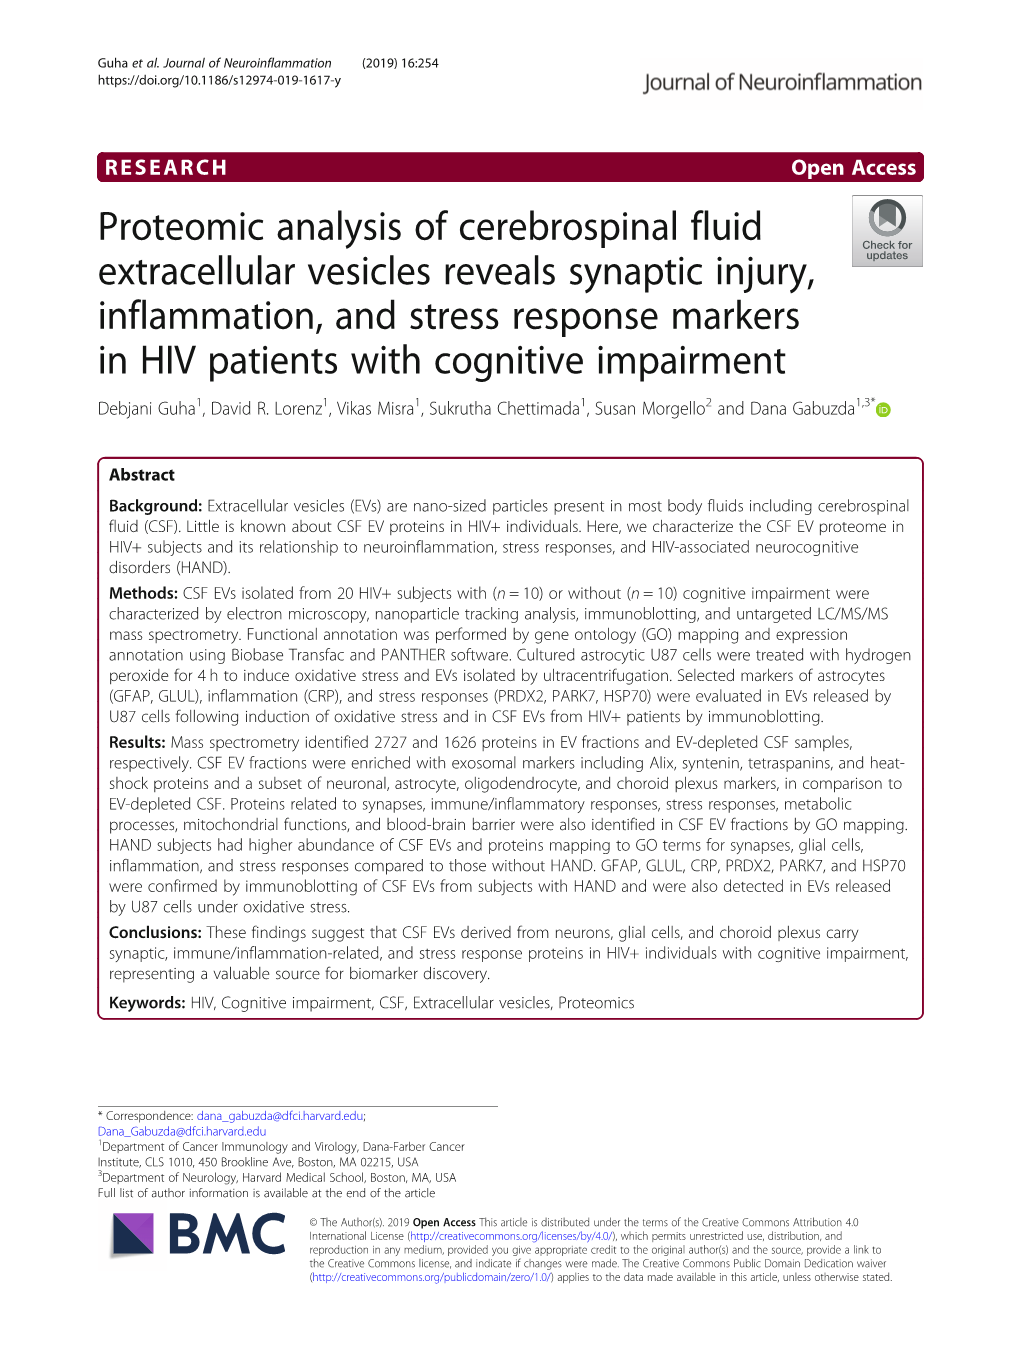 Proteomic Analysis of Cerebrospinal Fluid Extracellular Vesicles Reveals